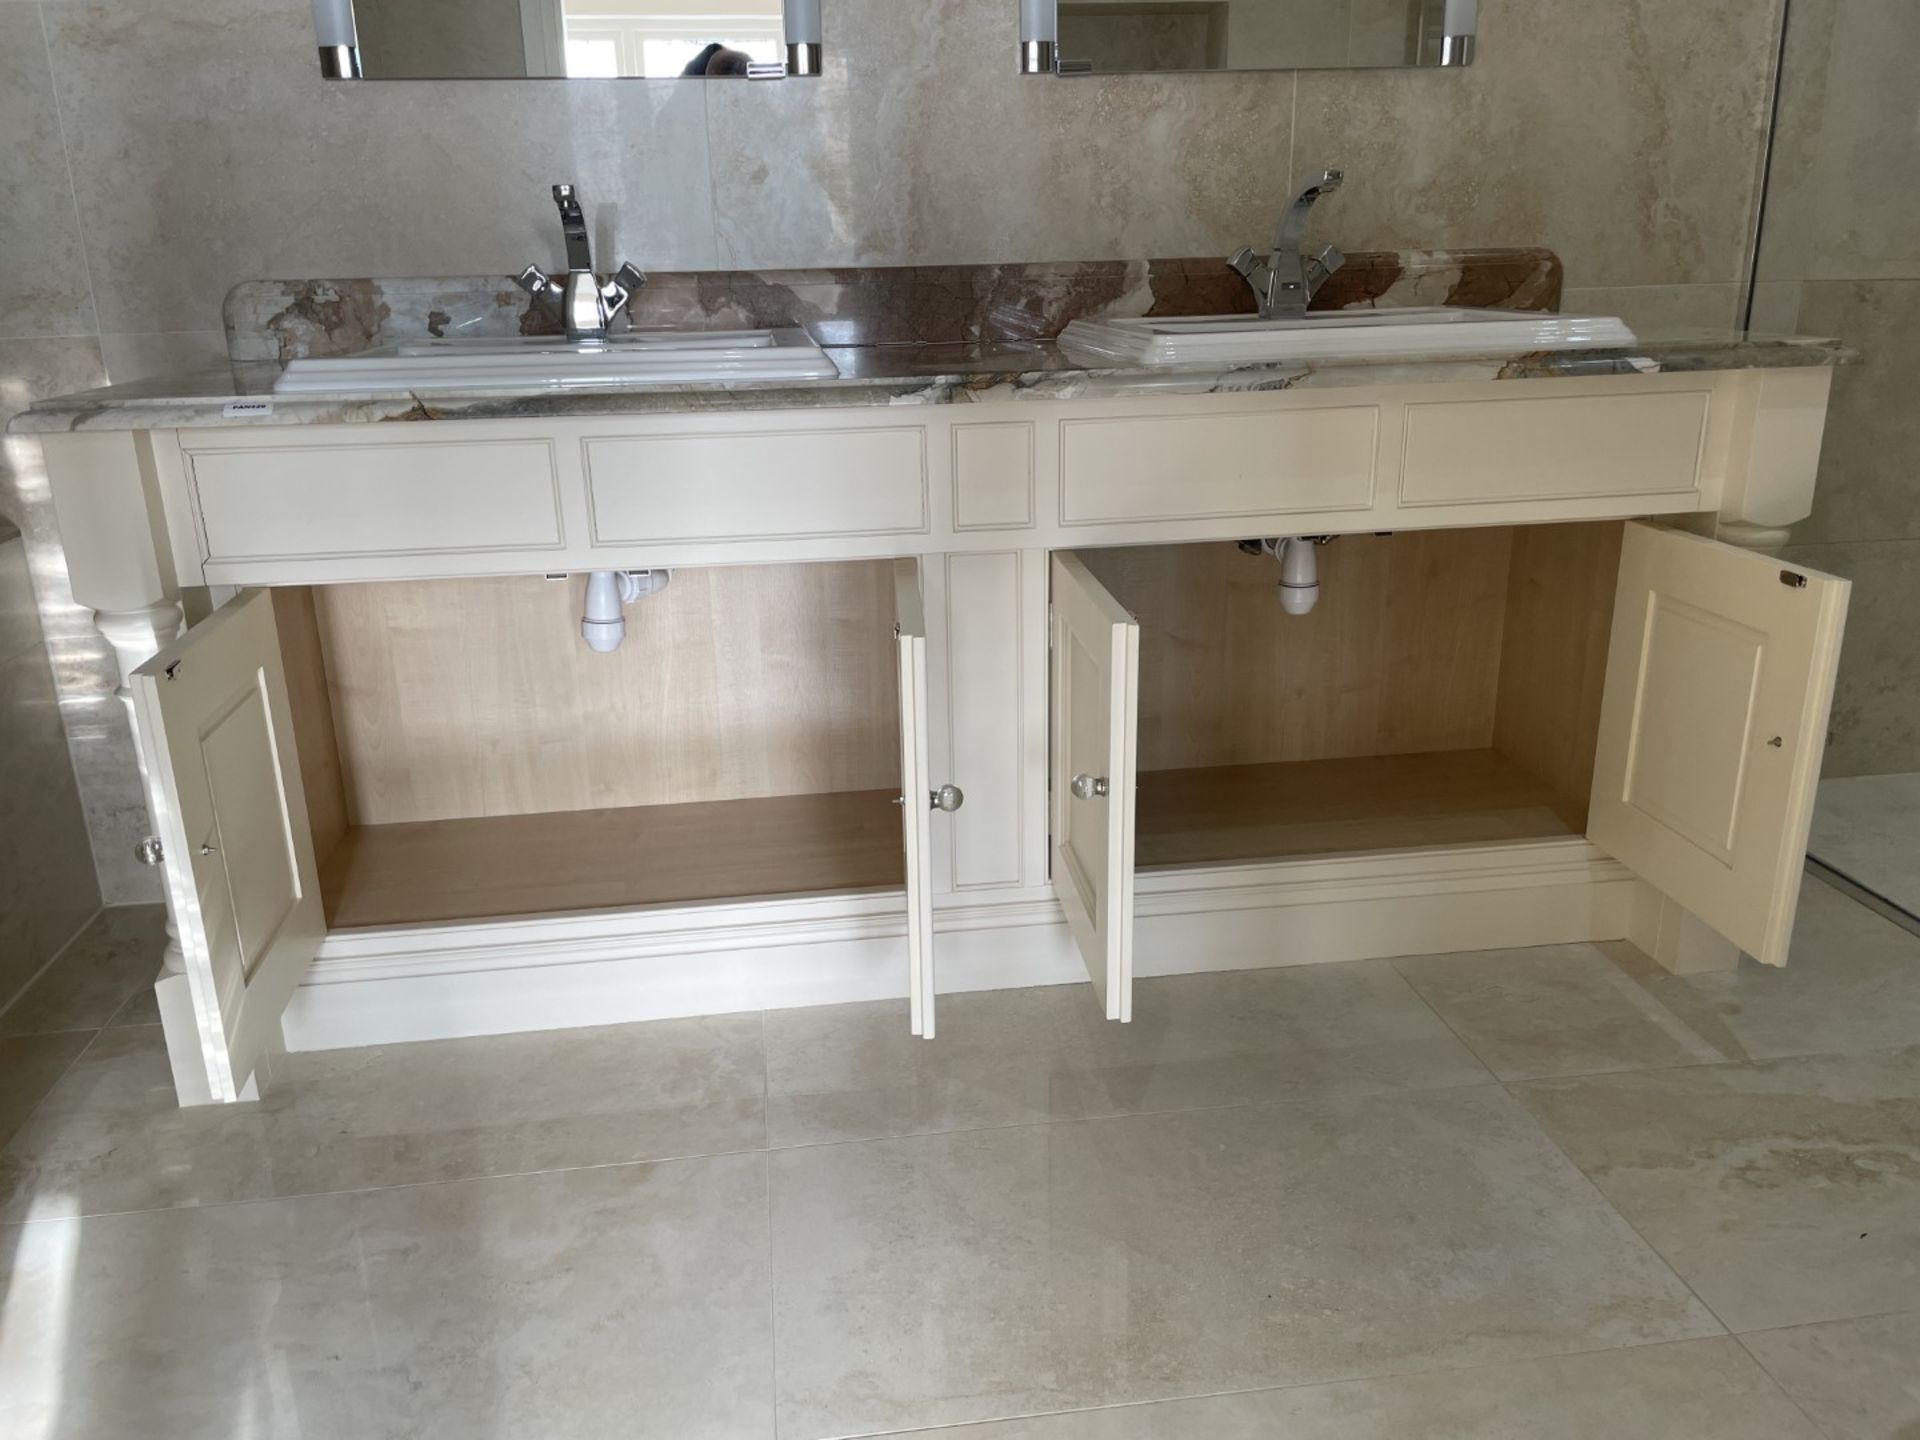 1 x Bespoke Marble-topped Solid Wood Double Vanity Unit with 2 x Villeroy & Boch Basins + Taps - Image 29 of 33